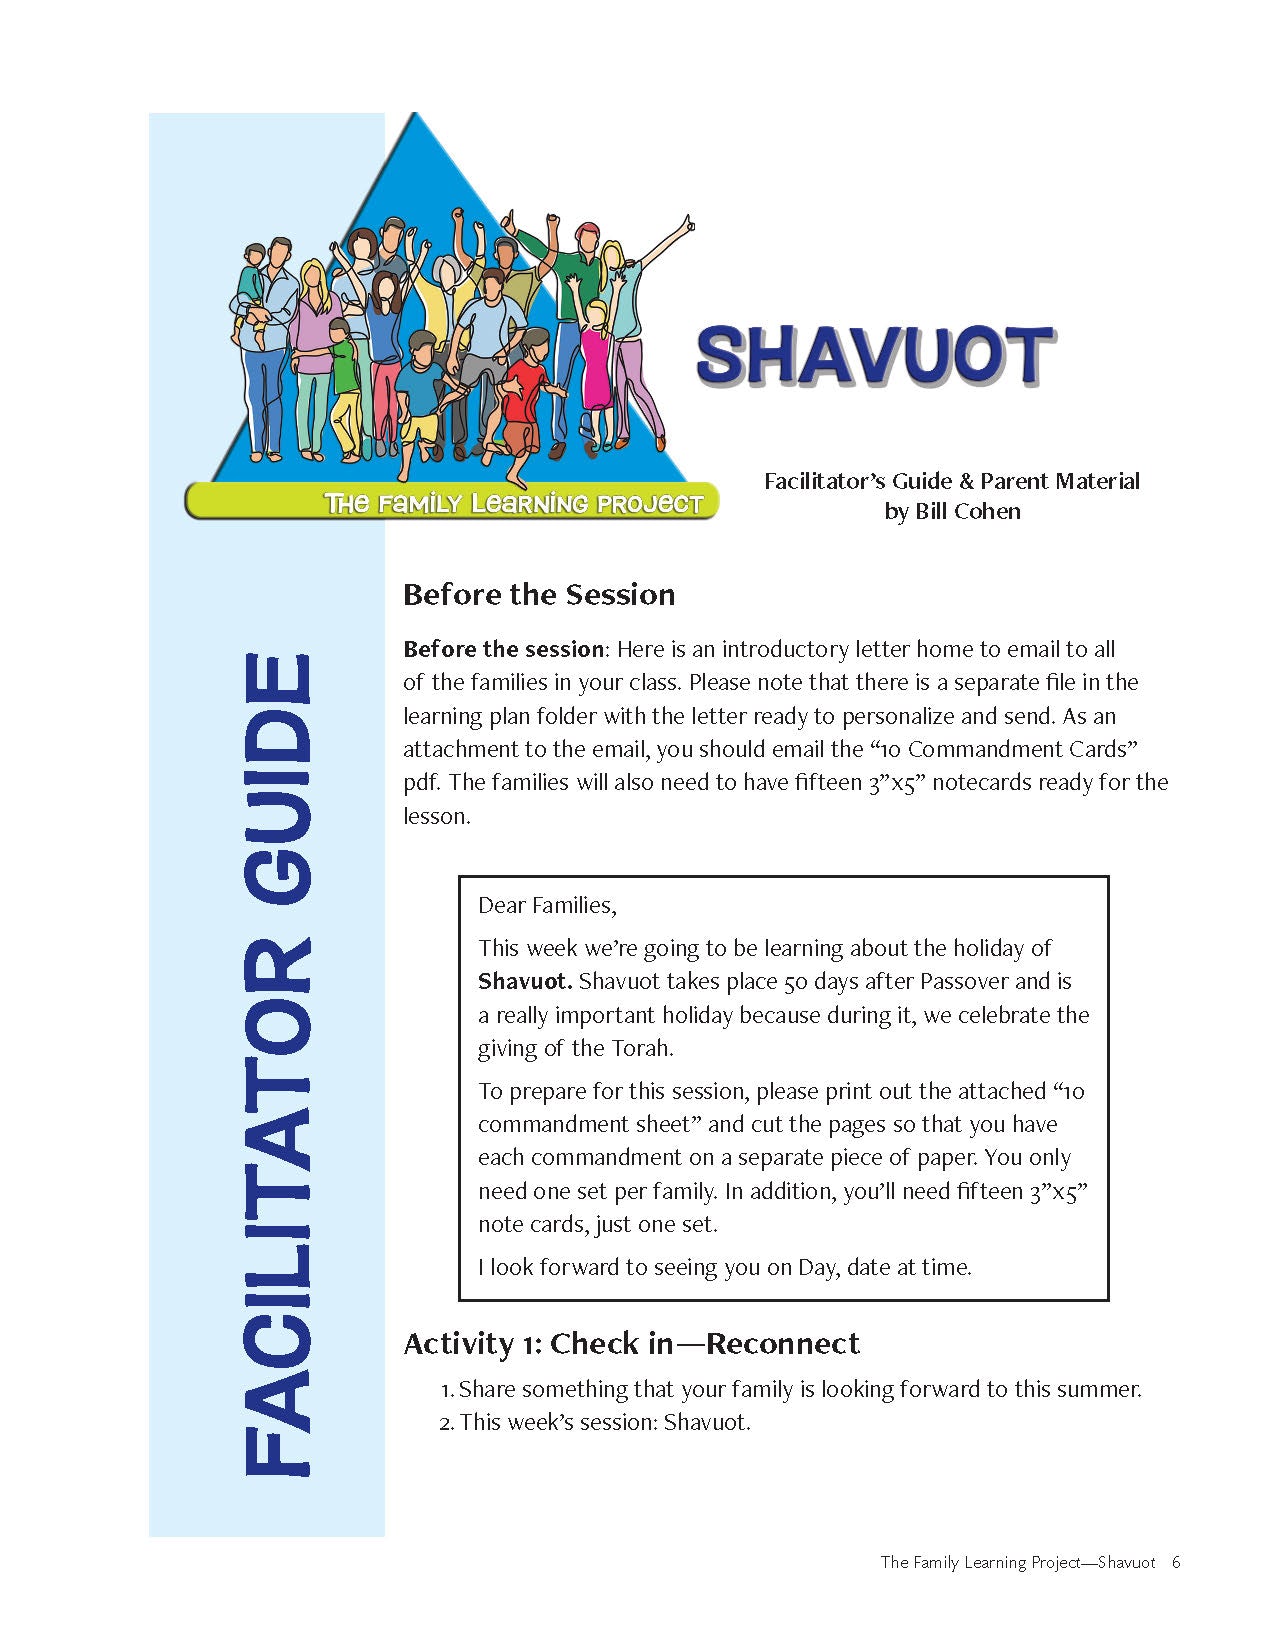 Family Learning Project: Shavuot